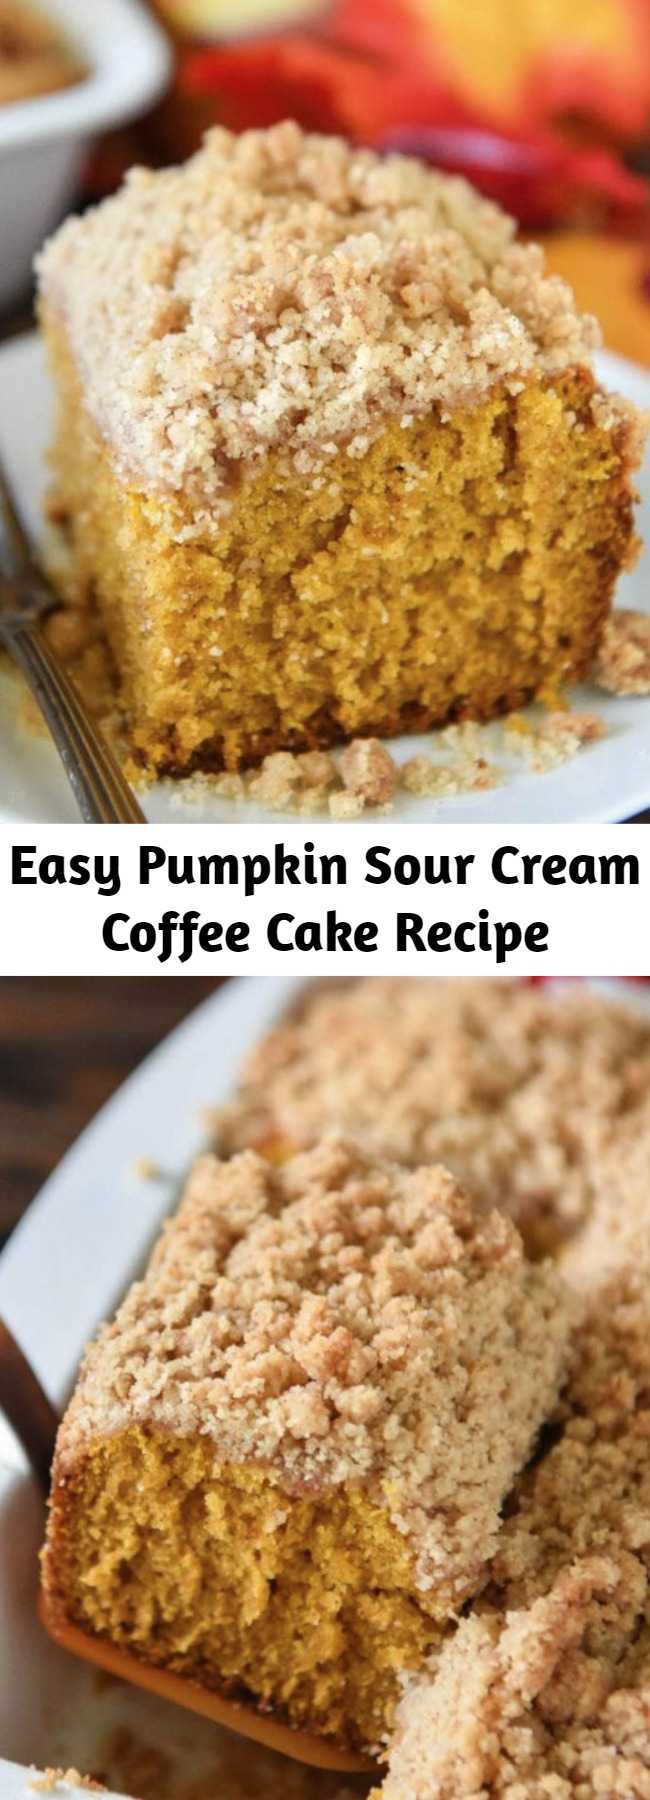 Easy Pumpkin Sour Cream Coffee Cake Recipe - An extra moist pumpkin spice cake (made from scratch) is topped with an amazing cinnamon crumb topping! Serve it with coffee for breakfast or for dessert! #Pumpkin #CoffeeCake #Dessert #Cake